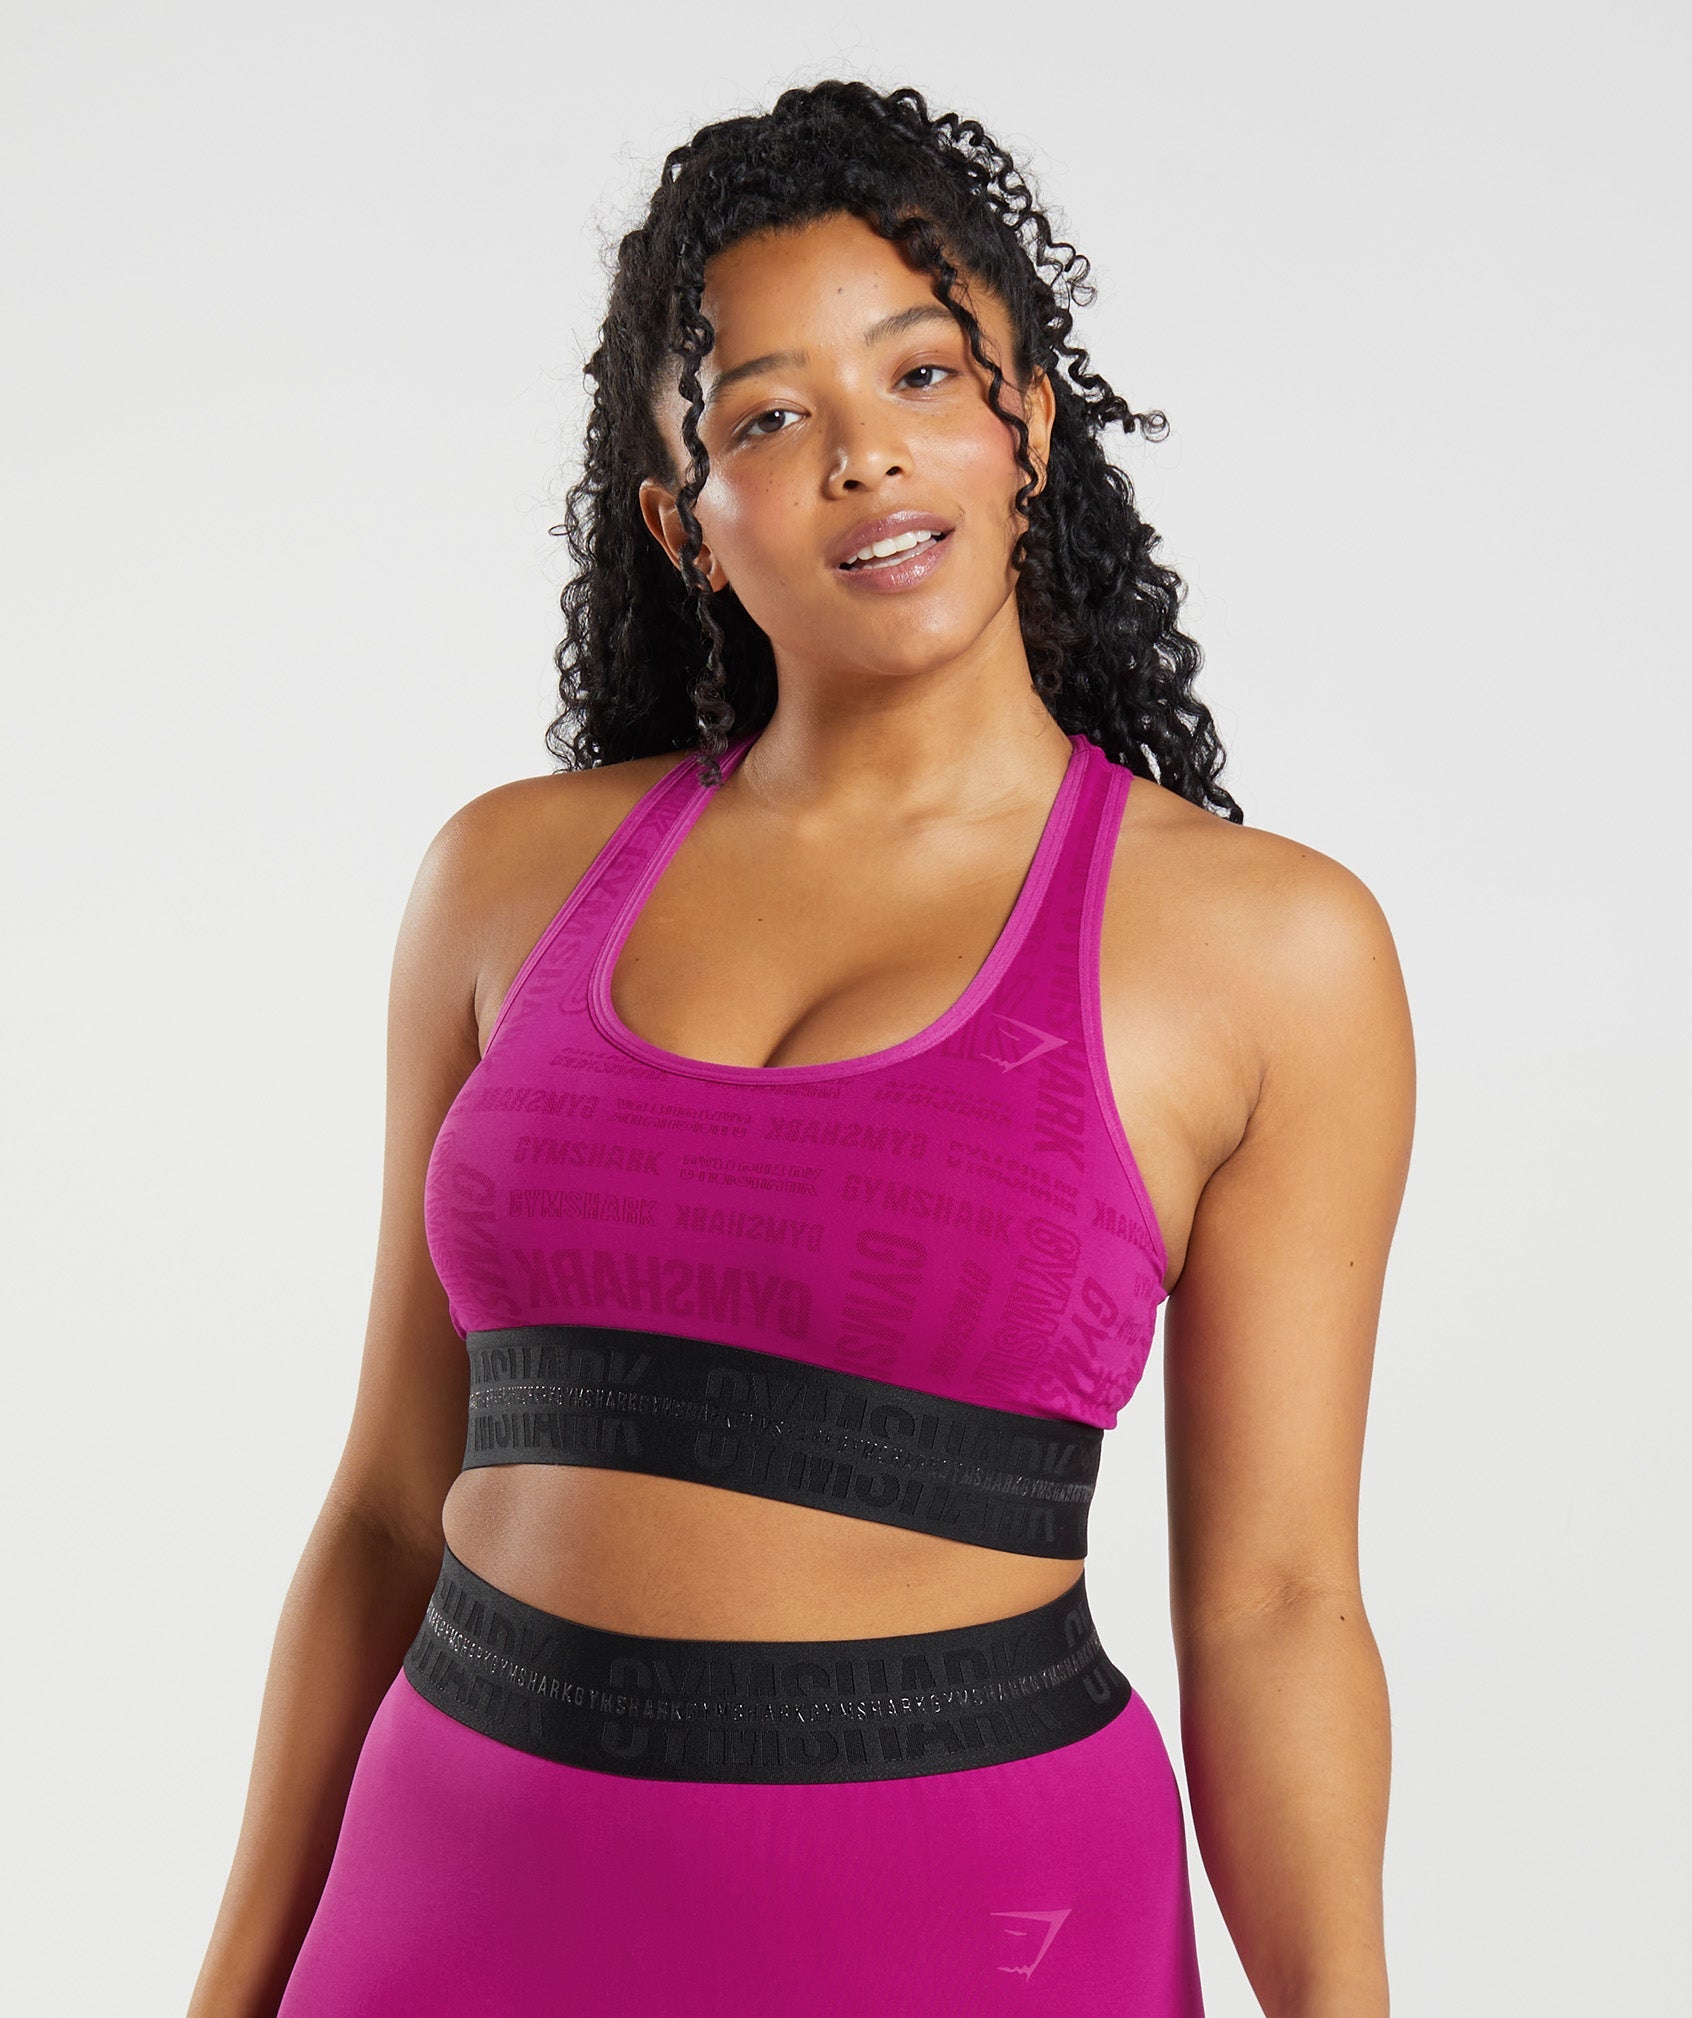 Vision Sports Bra in Dragon Pink - view 1